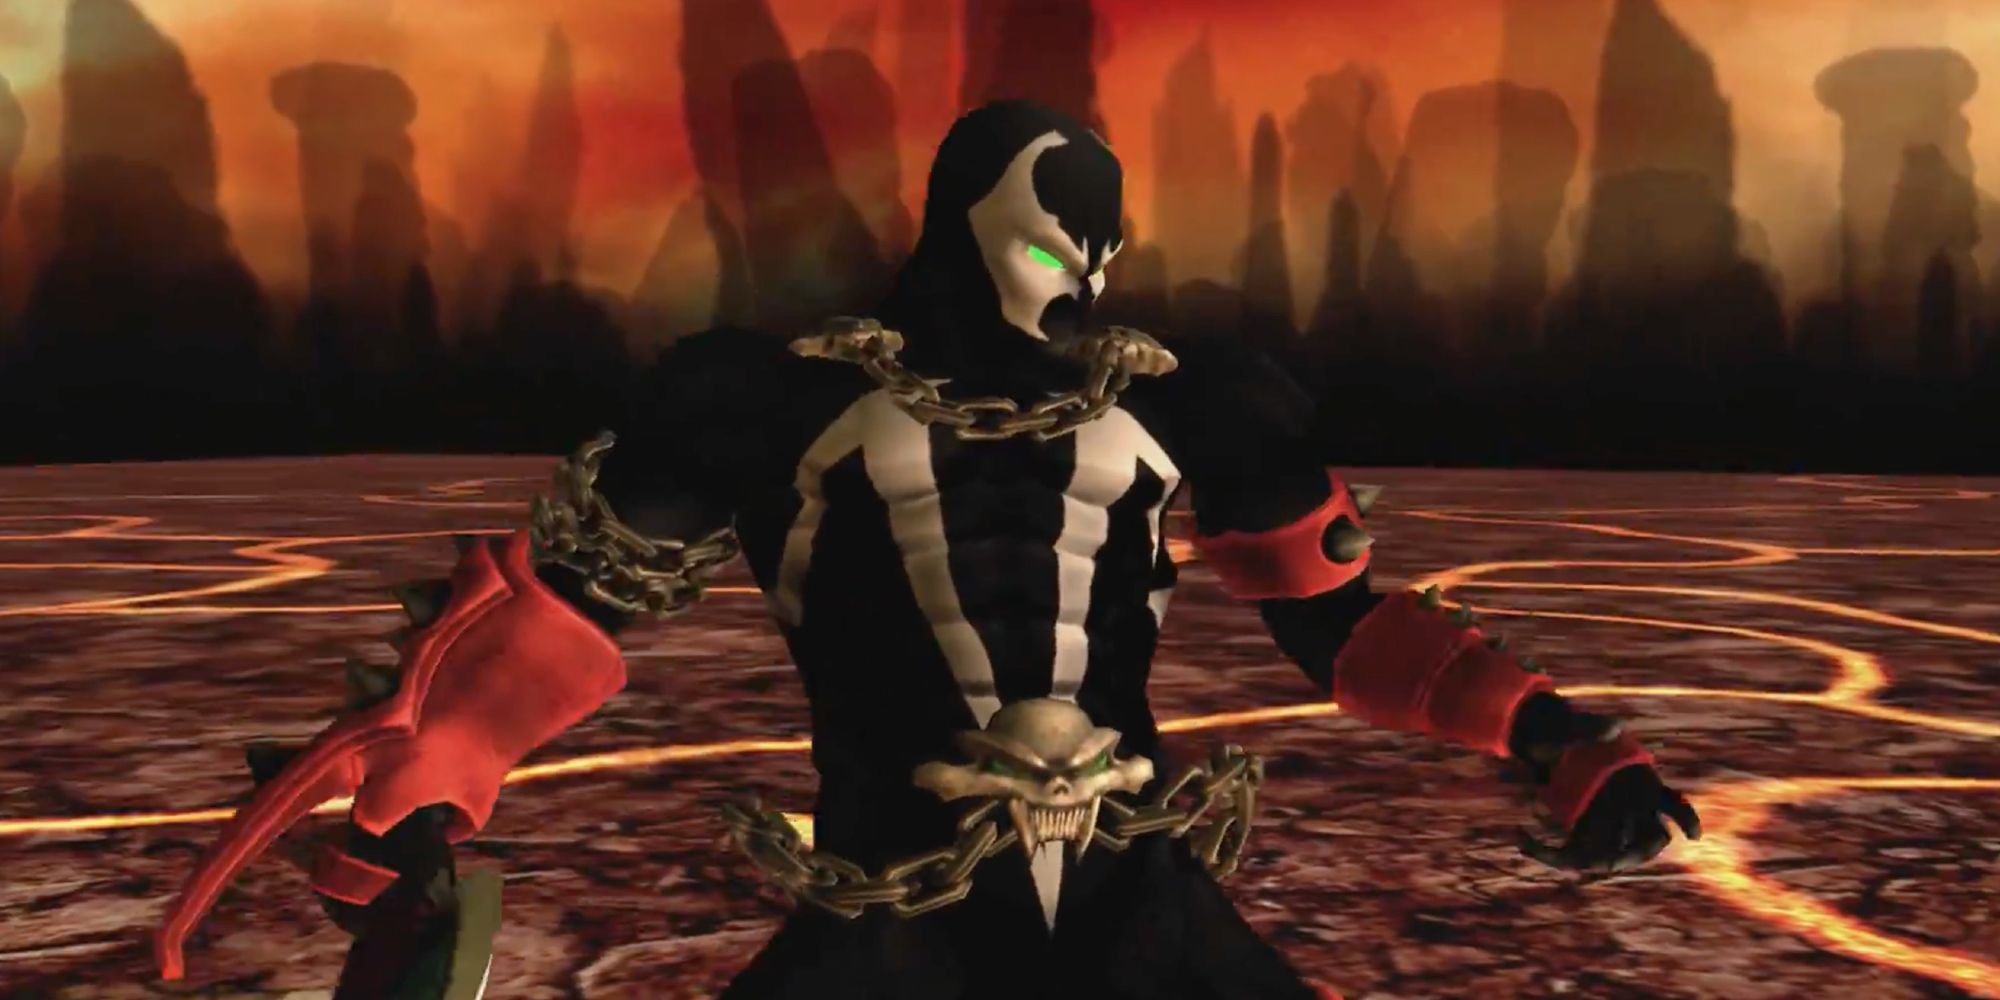 Iconic Fighting Stances in Video Games - Spawn - Player stares at enemy before battle